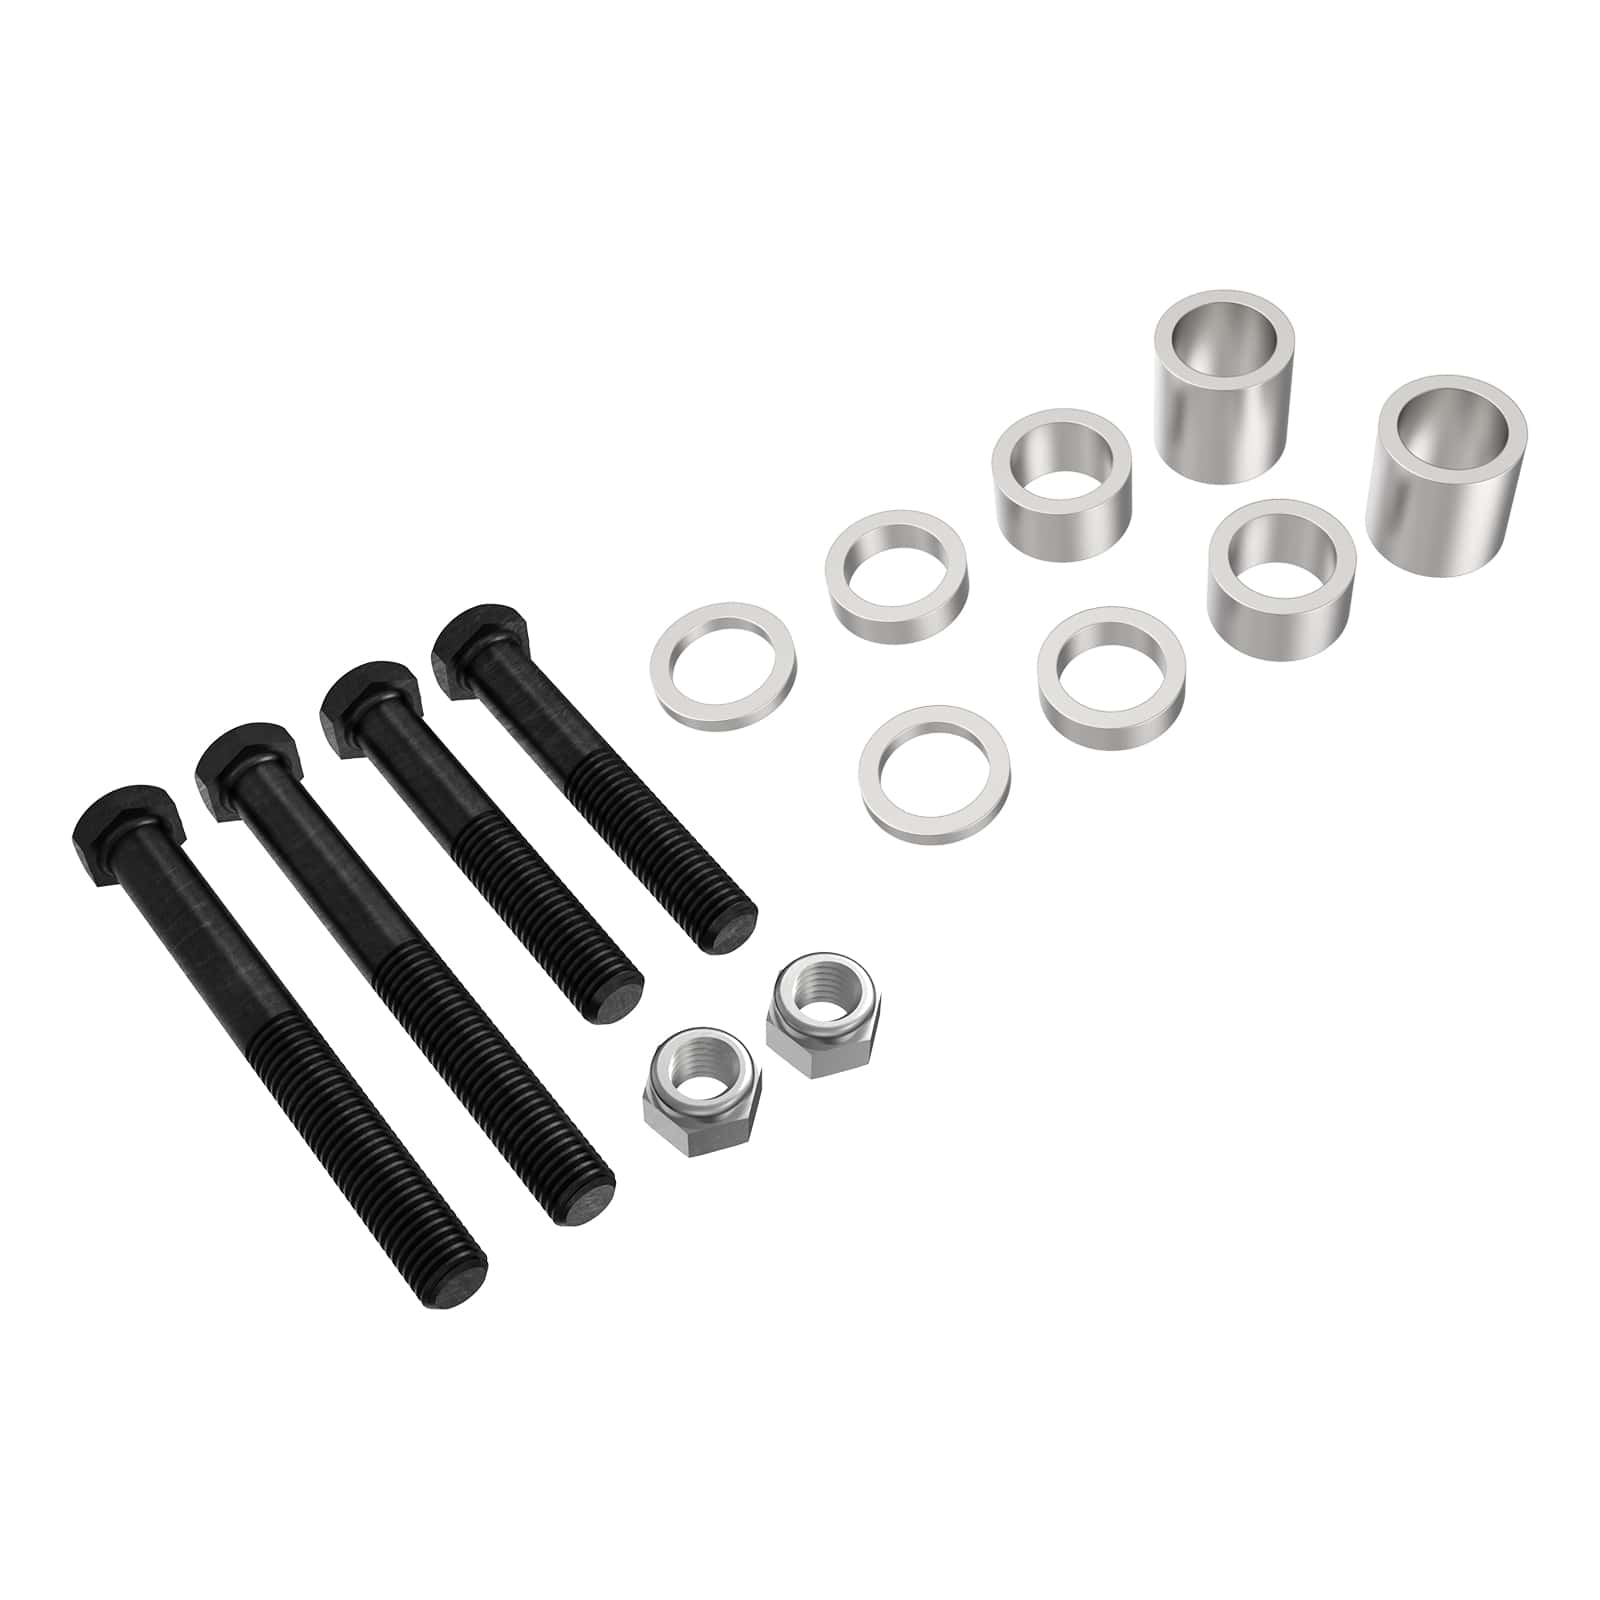 Adjustable Outer Tie-rod Ends For Maximum Bump Steer Kit Manual Rack For Ford Mustang 1979-1993